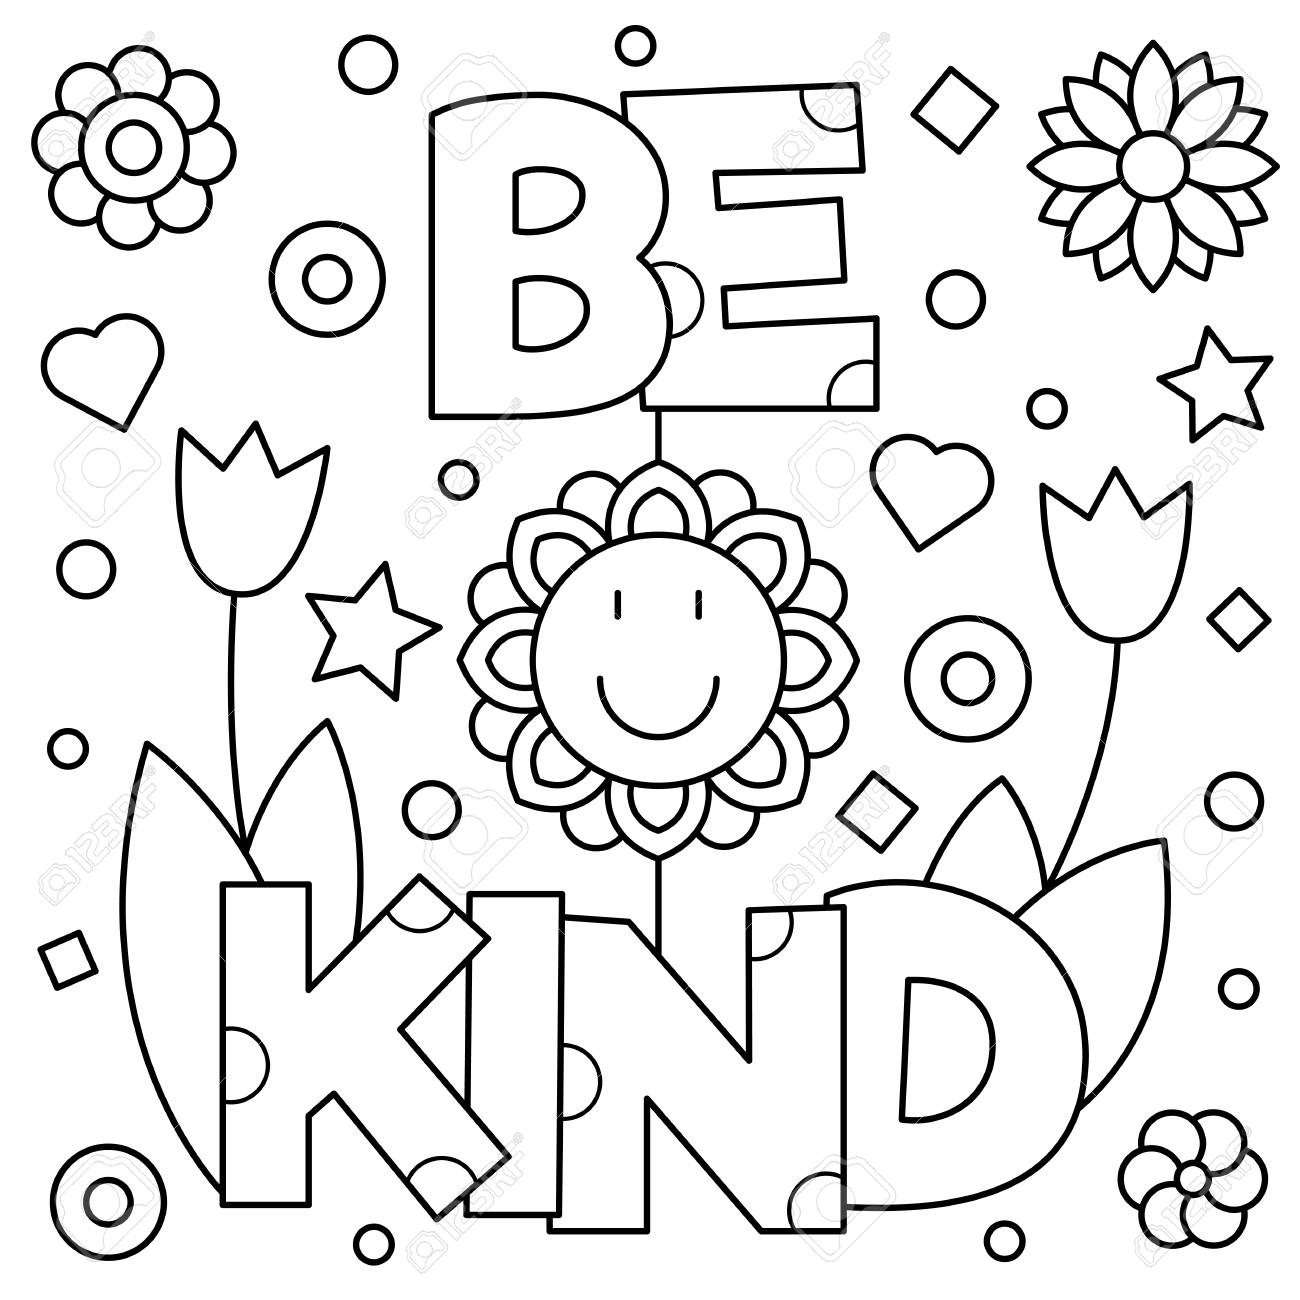 Be Kind Coloring Page at GetColoringscom Free printable